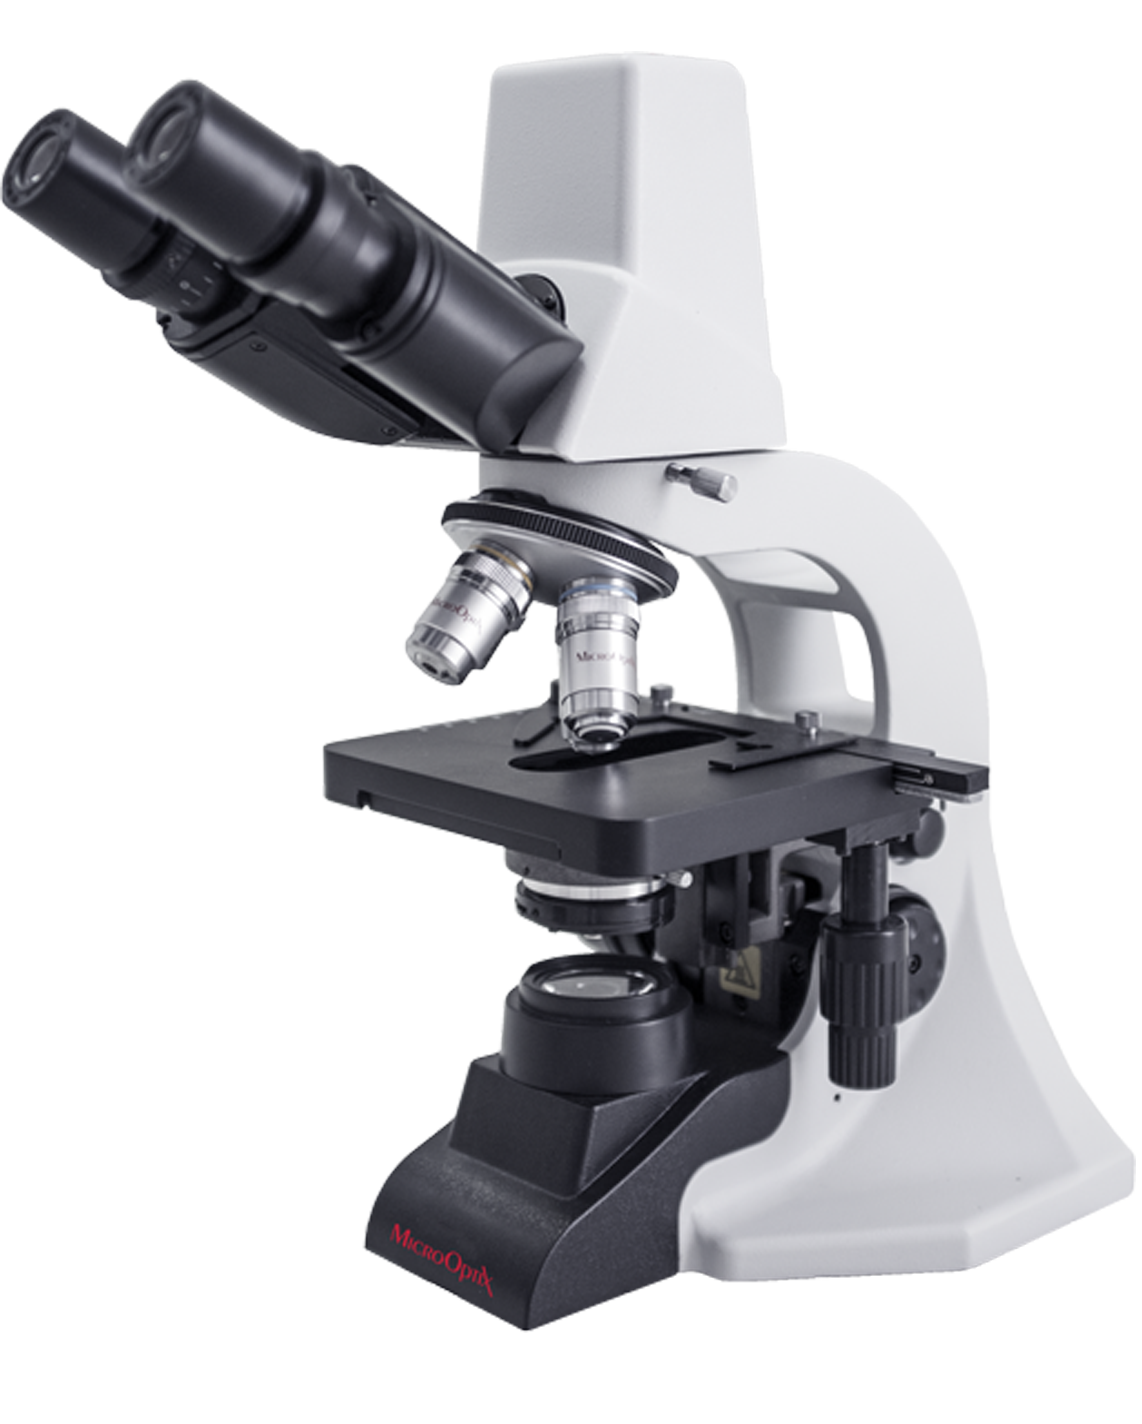 MX 50D Digital microscope with integrated camera